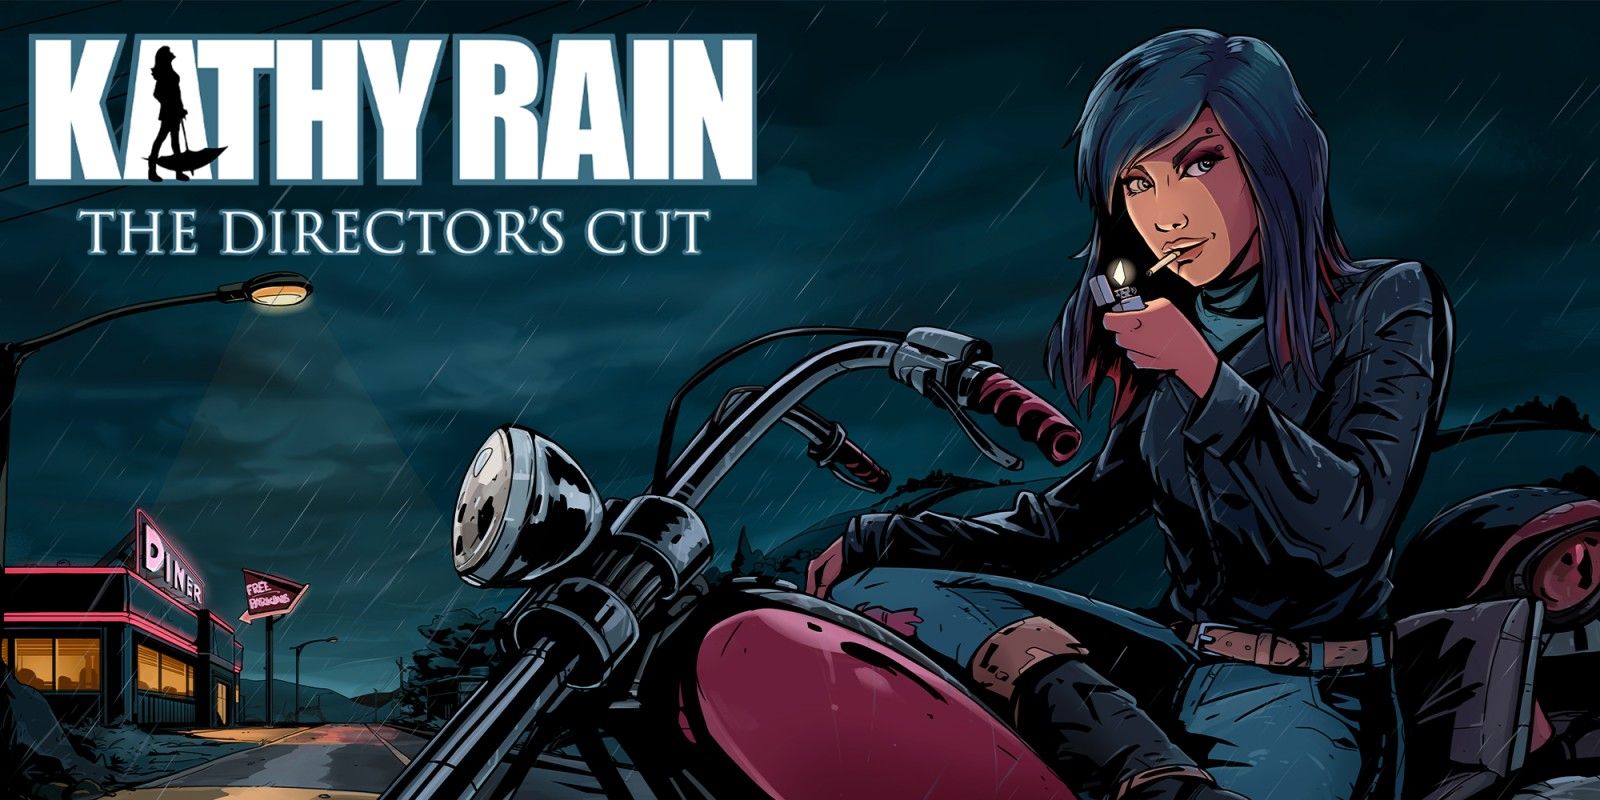 Kathy Rain lighting a cigarette on her motorcycle at night nearby a diner